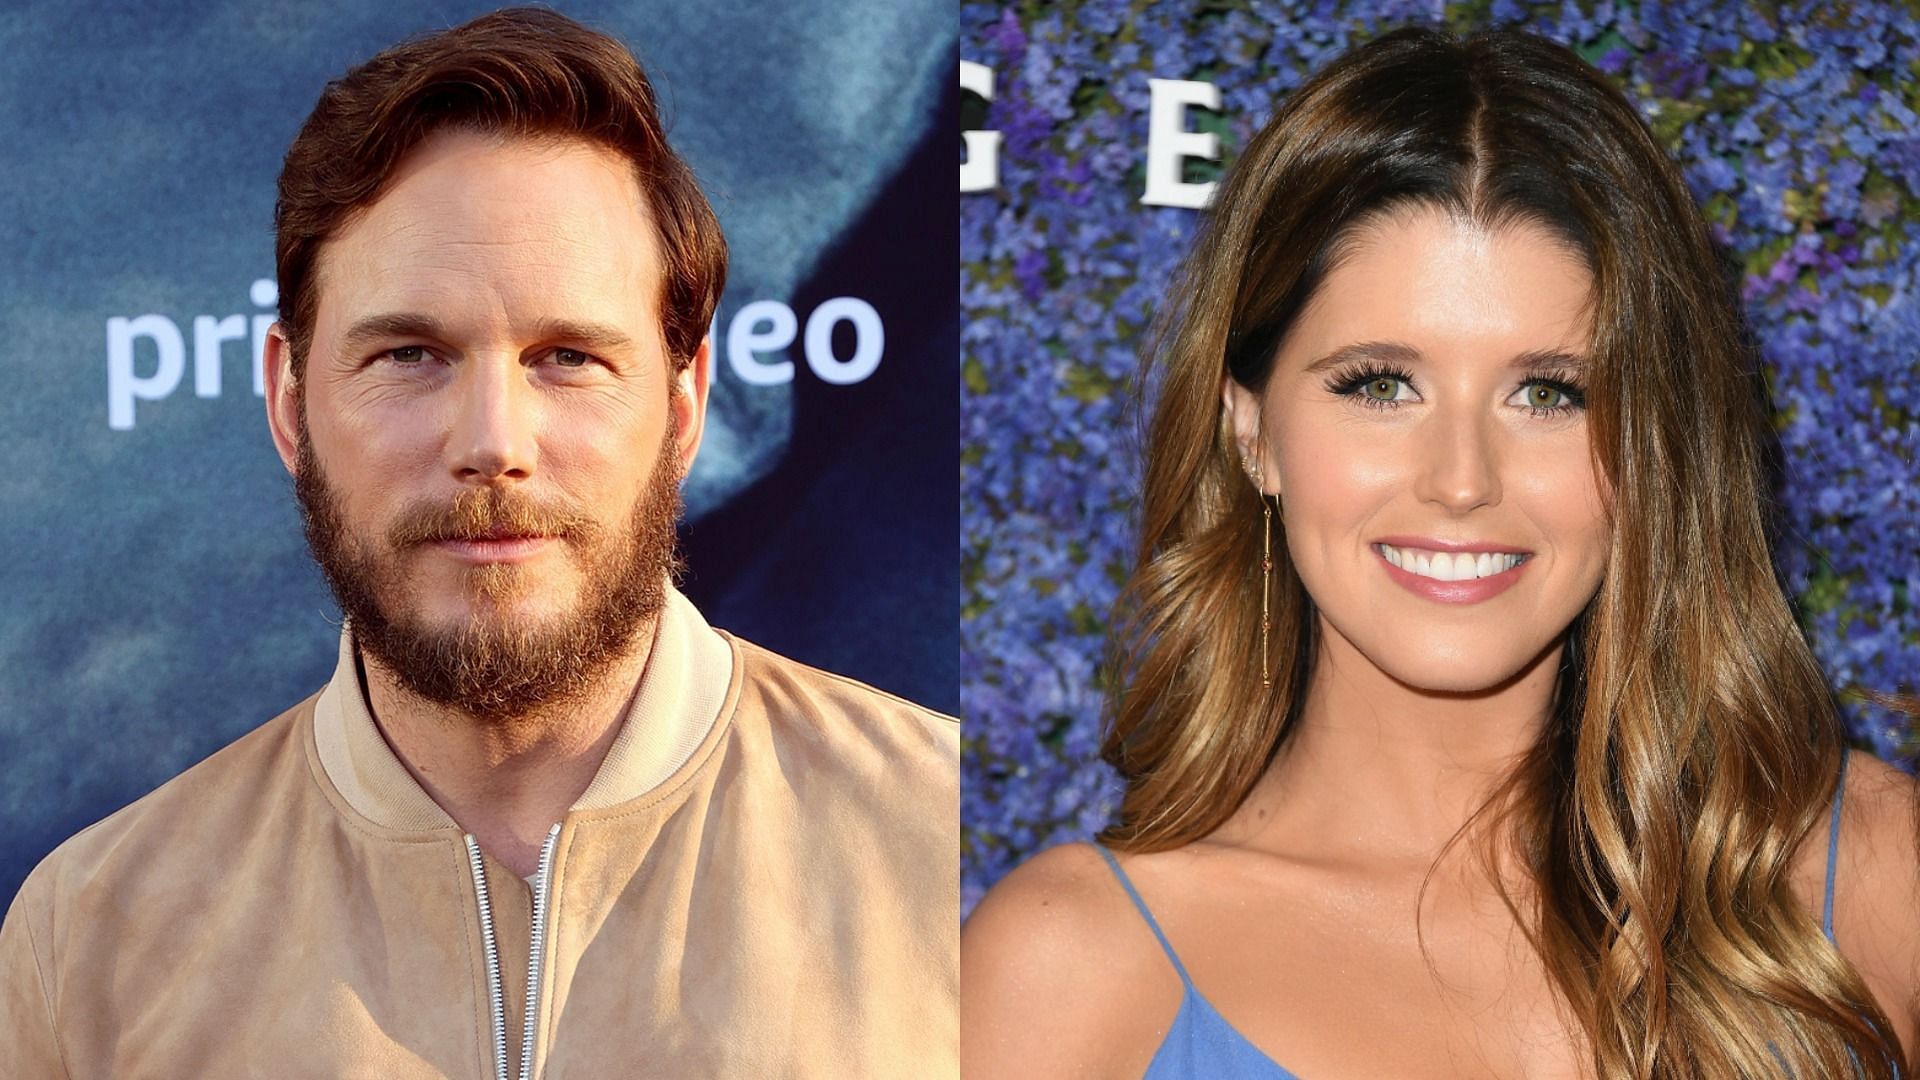 Chris Pratt and Katherine Schwarzenegger are ready to welcome their second child together (Image via Sportskeeda)